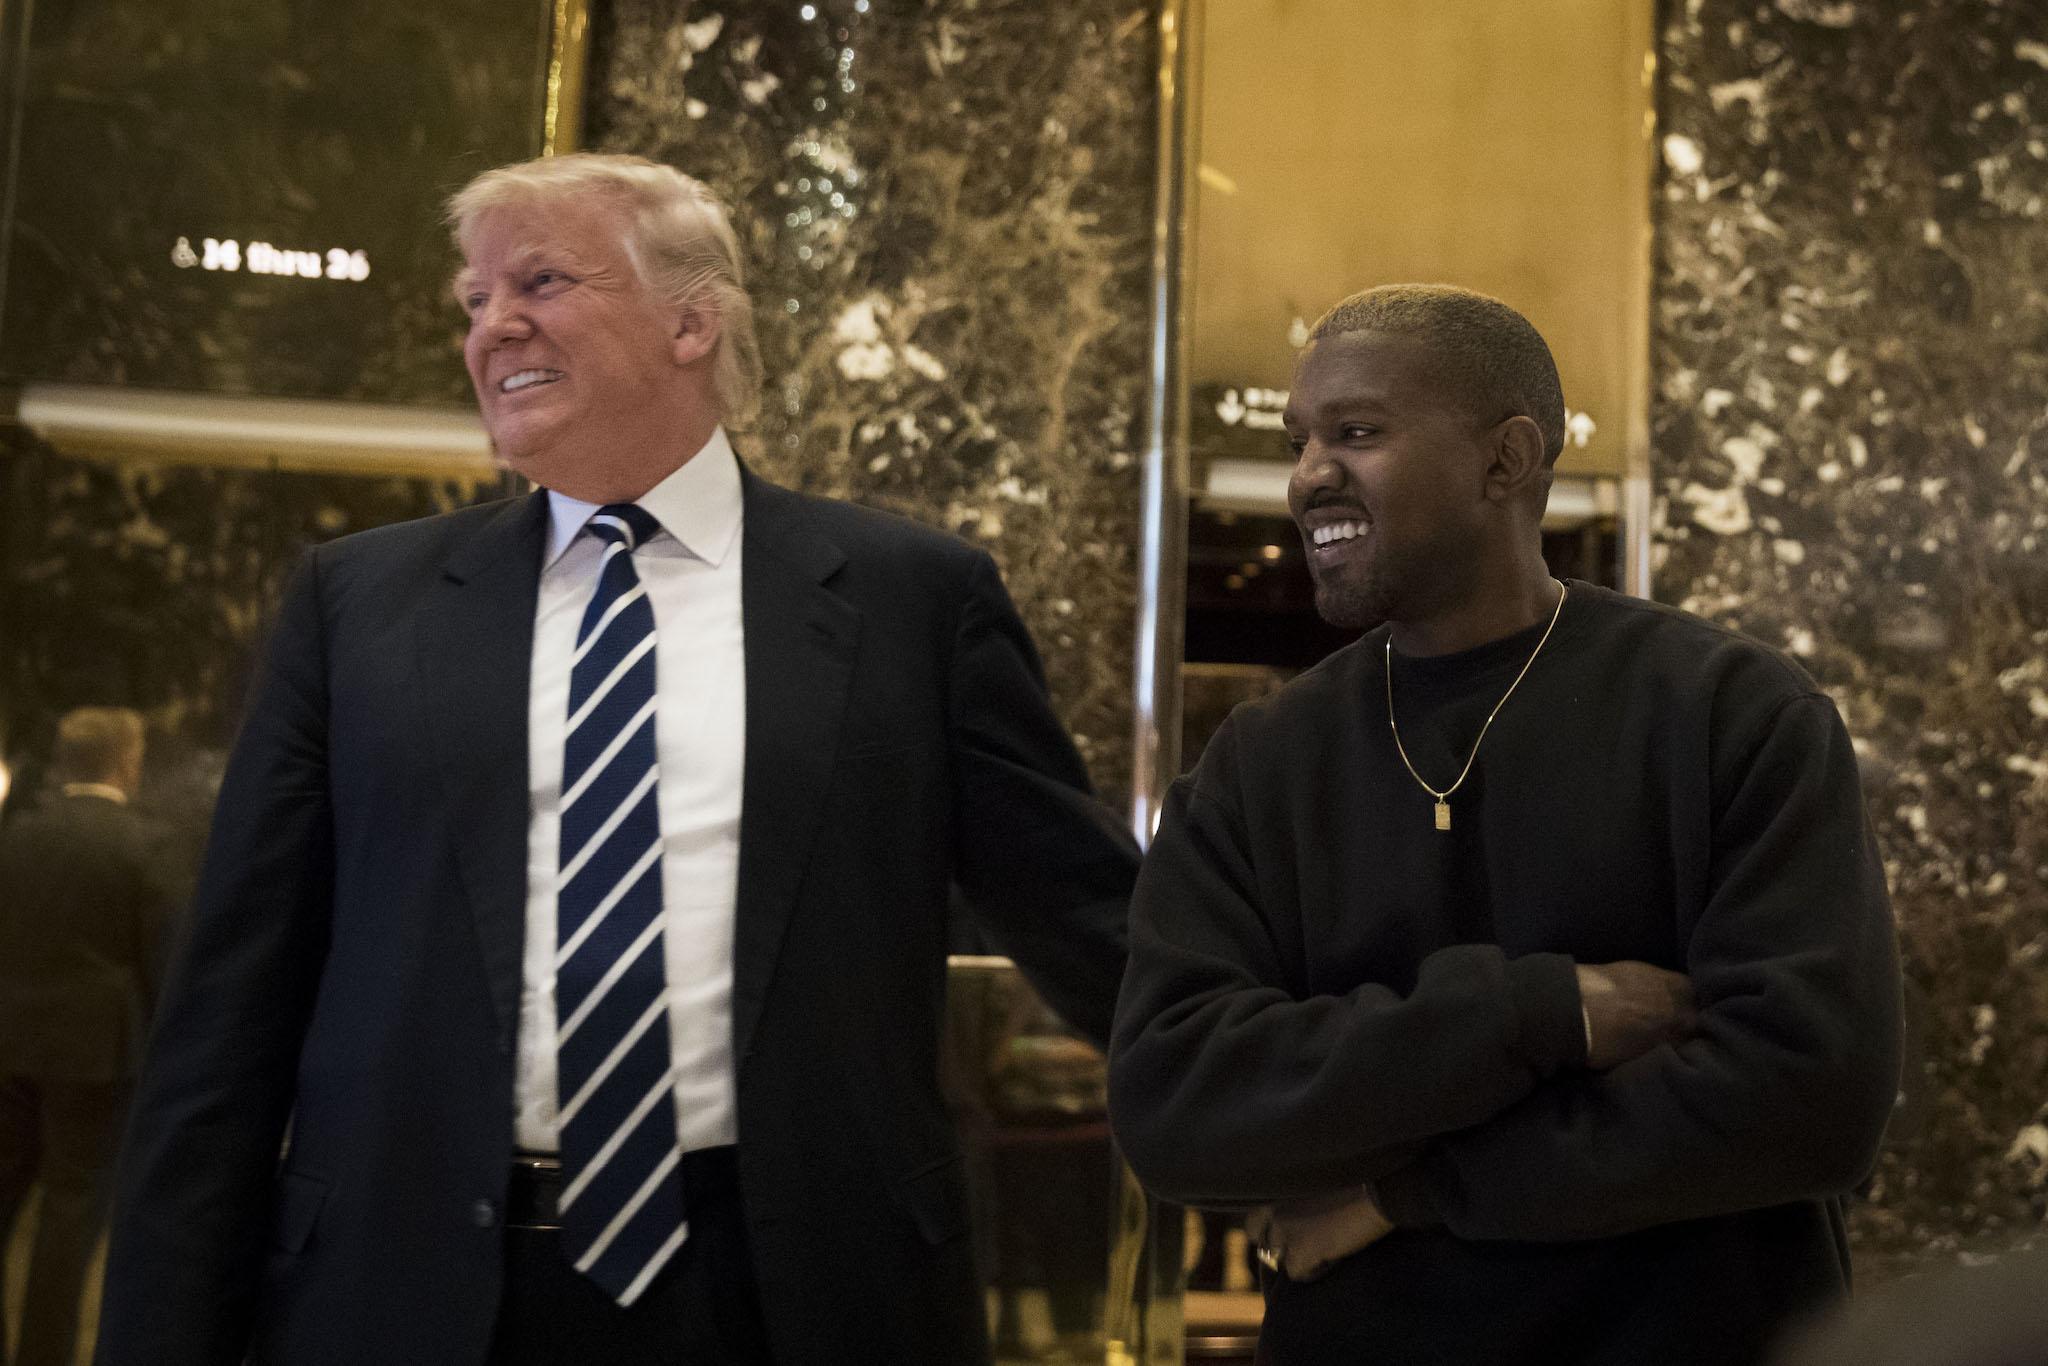 President-elect Donald Trump and Kanye West stand together in the lobby at Trump Tower, December 13, 2016 in New York City